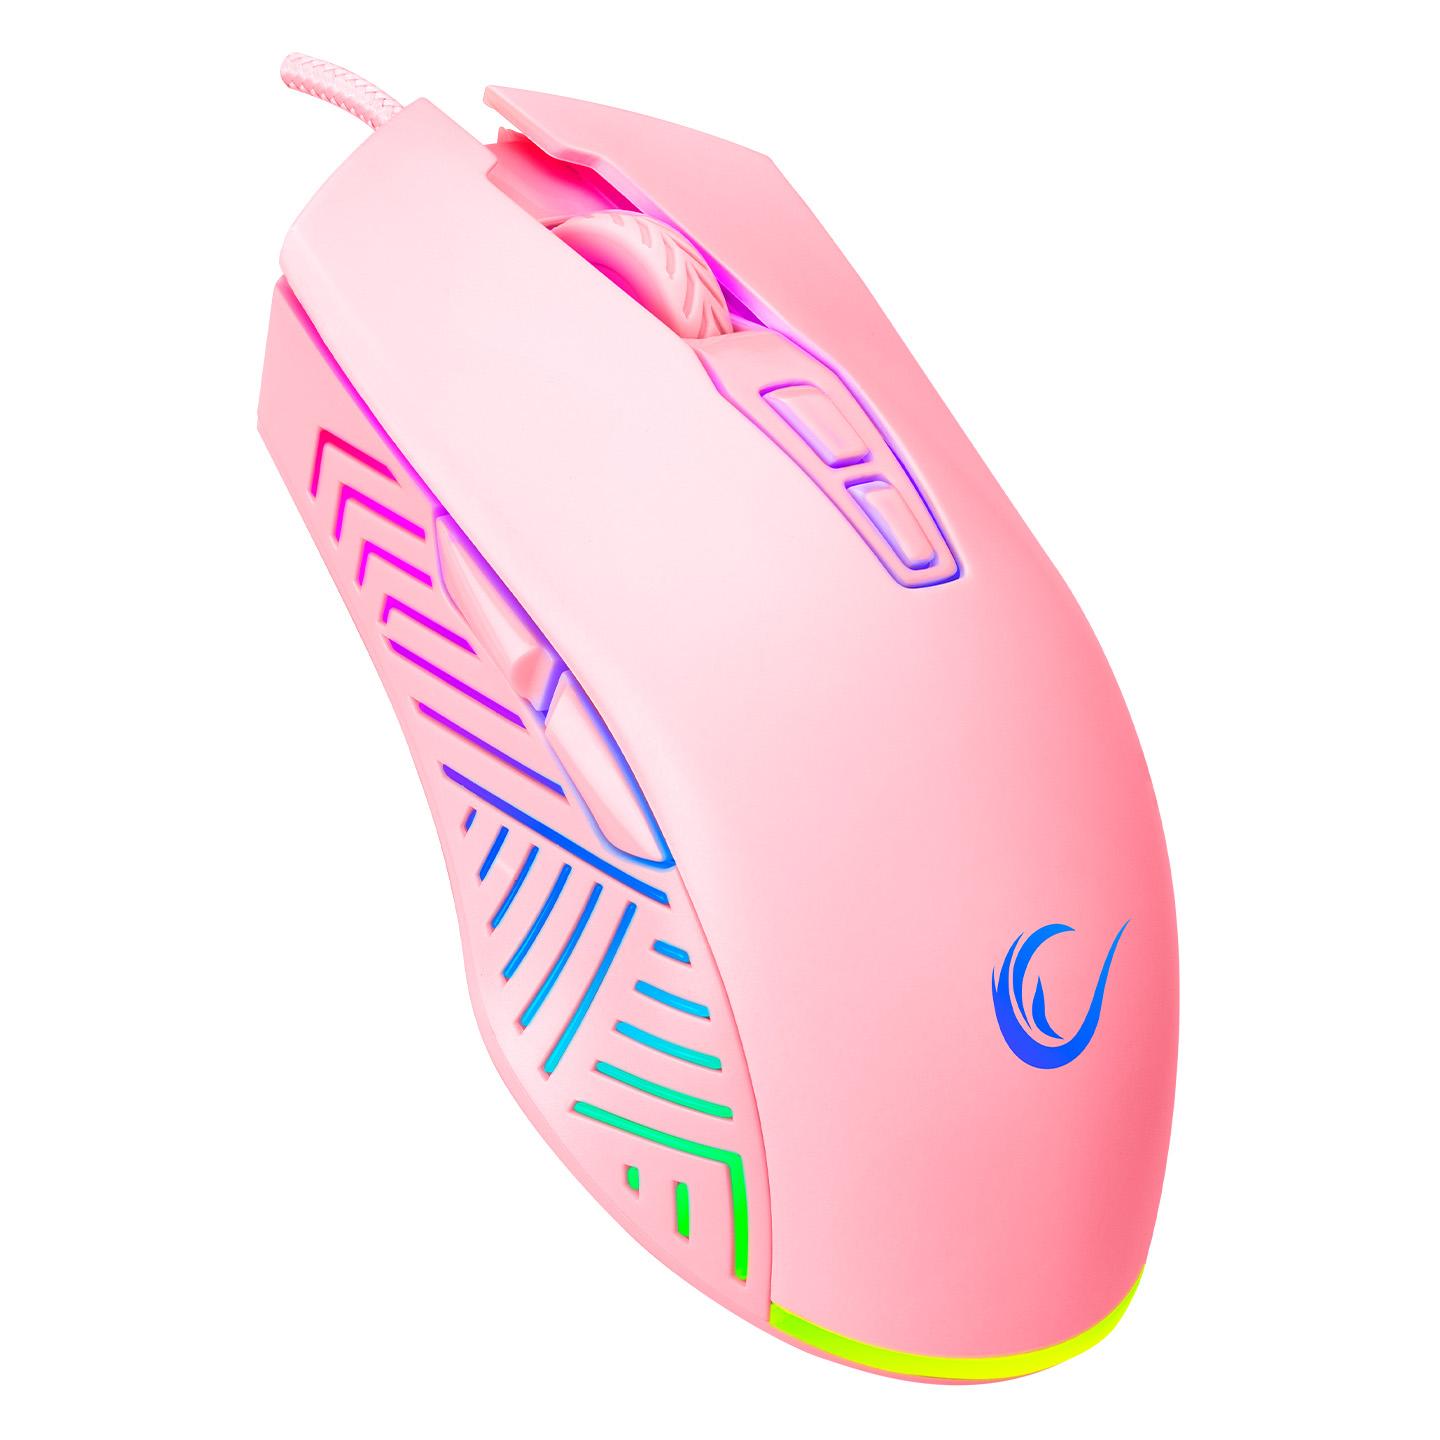 Selected image for RAMPAGE Gaming miš SMX-G68 roze